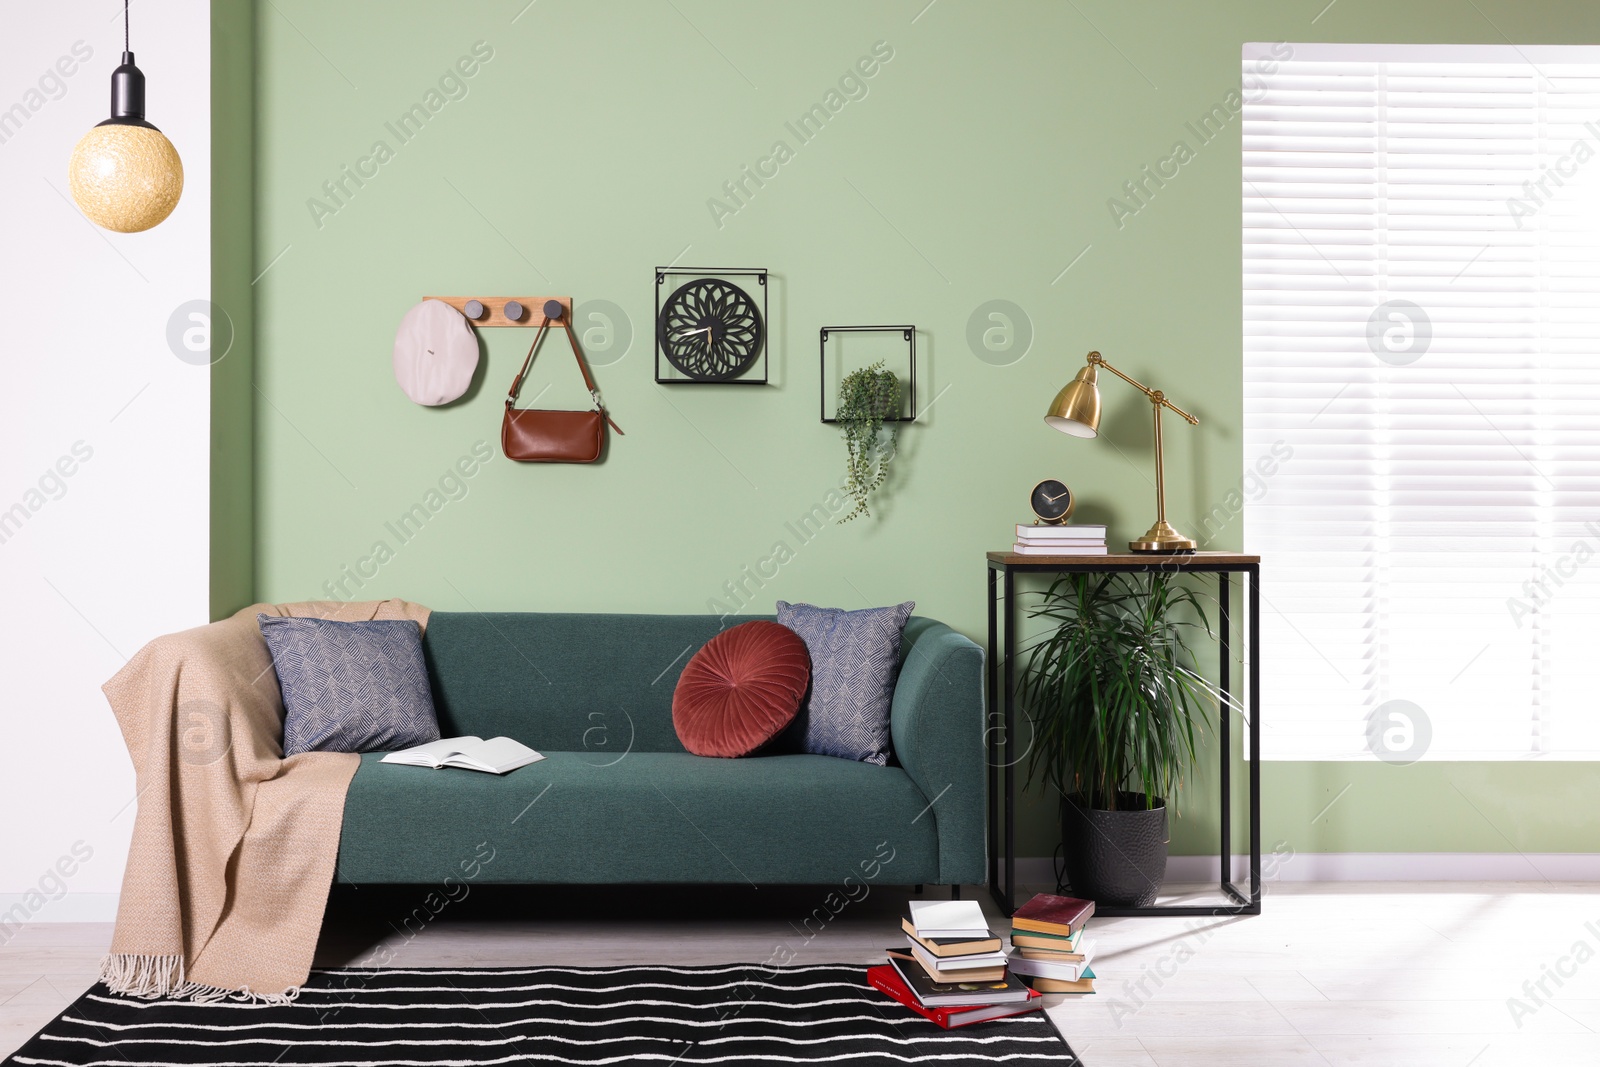 Photo of Stylish interior with comfortable sofa, blanket and cushions near console table